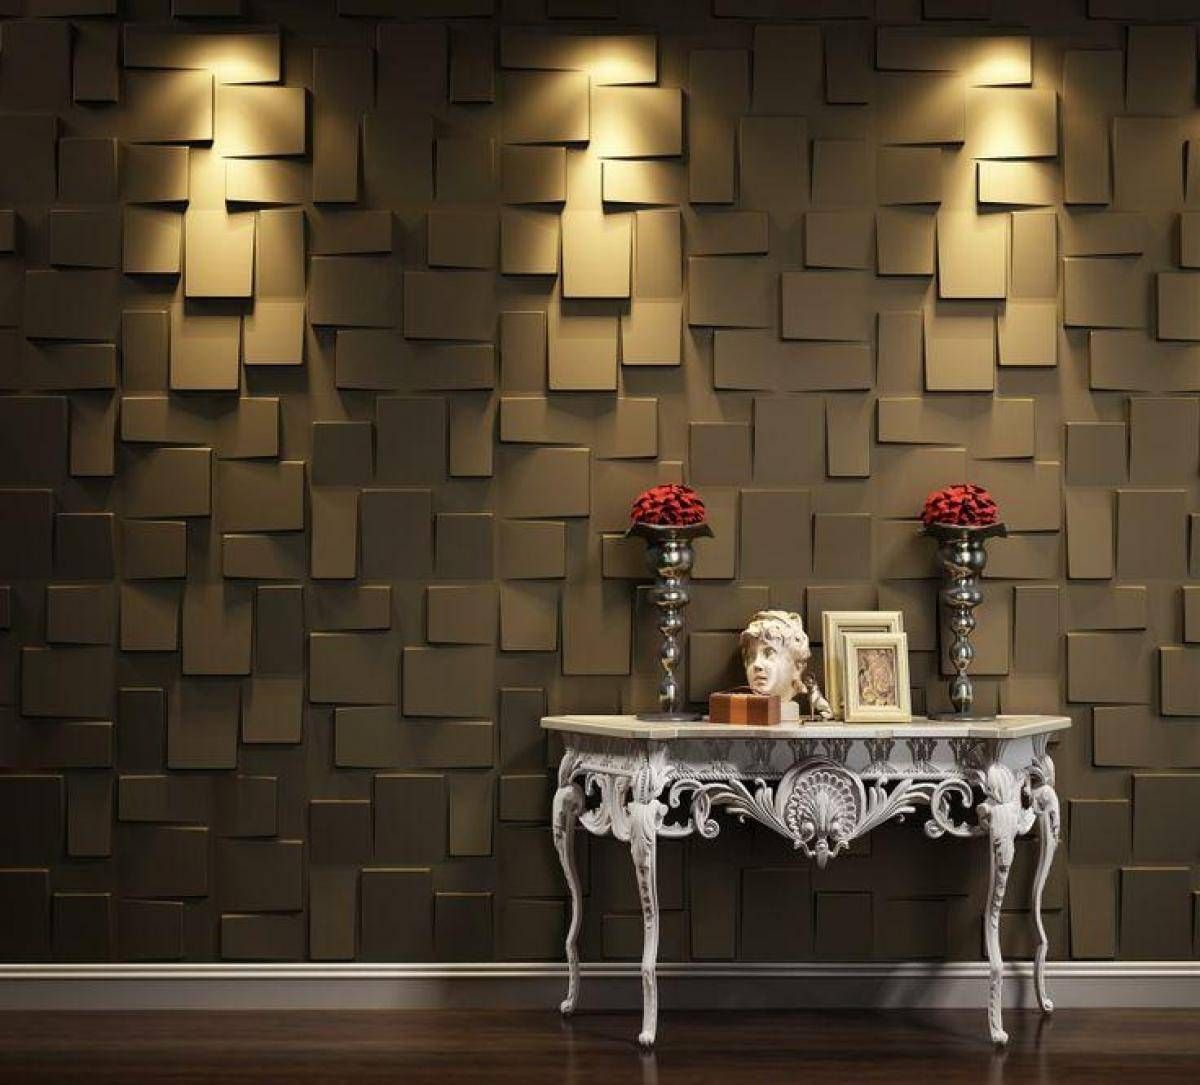 Smartness Design Wall Paneling Design 3d Wall Panels Interior 71 Intended For Latest 3d Wall Covering Panels (View 20 of 20)